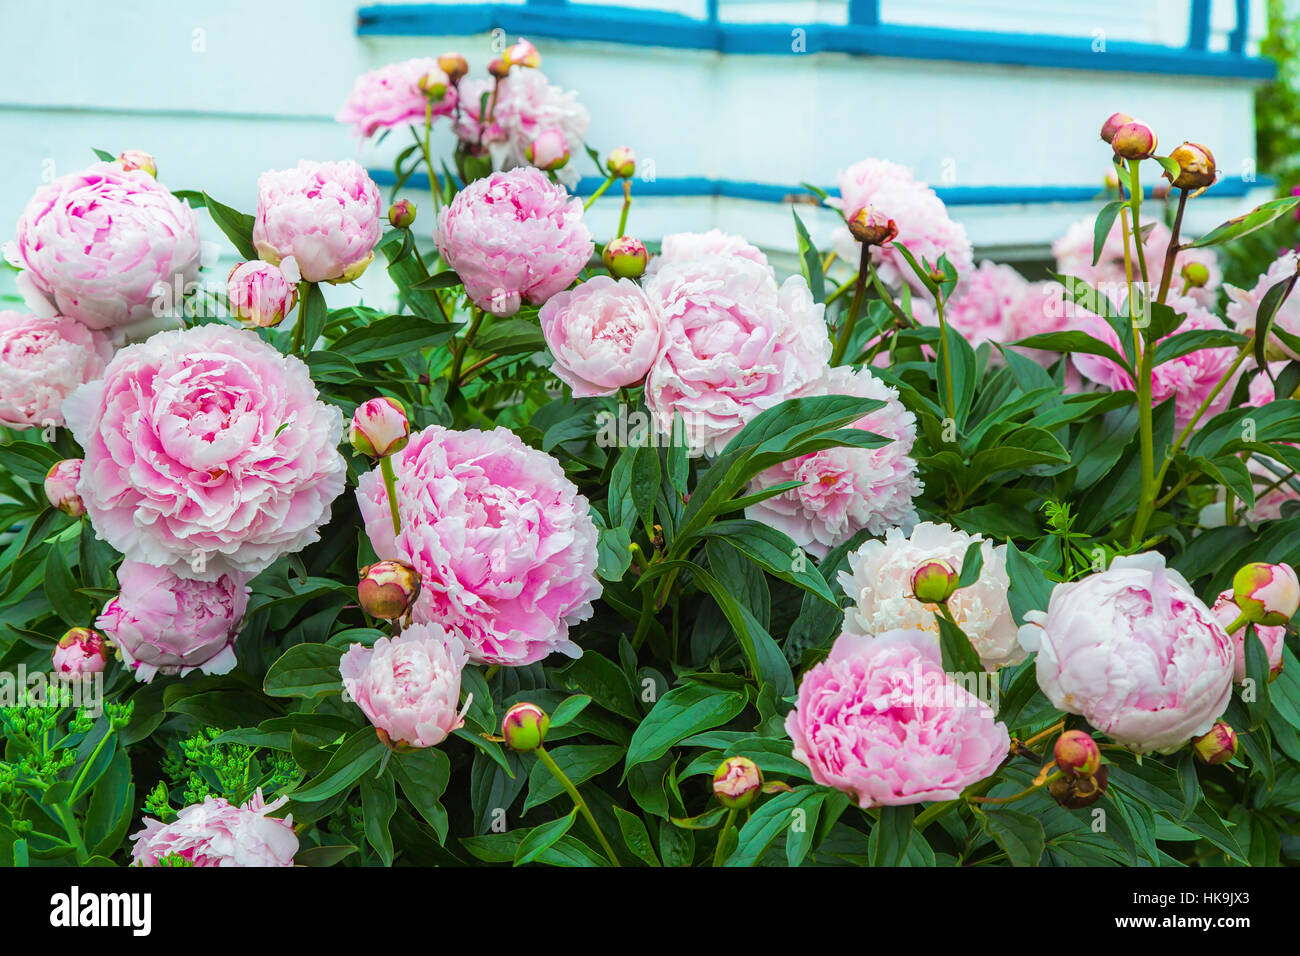 Pink peony (Paeonia officinalis) plants in bloom in the home garden. Stock Photo